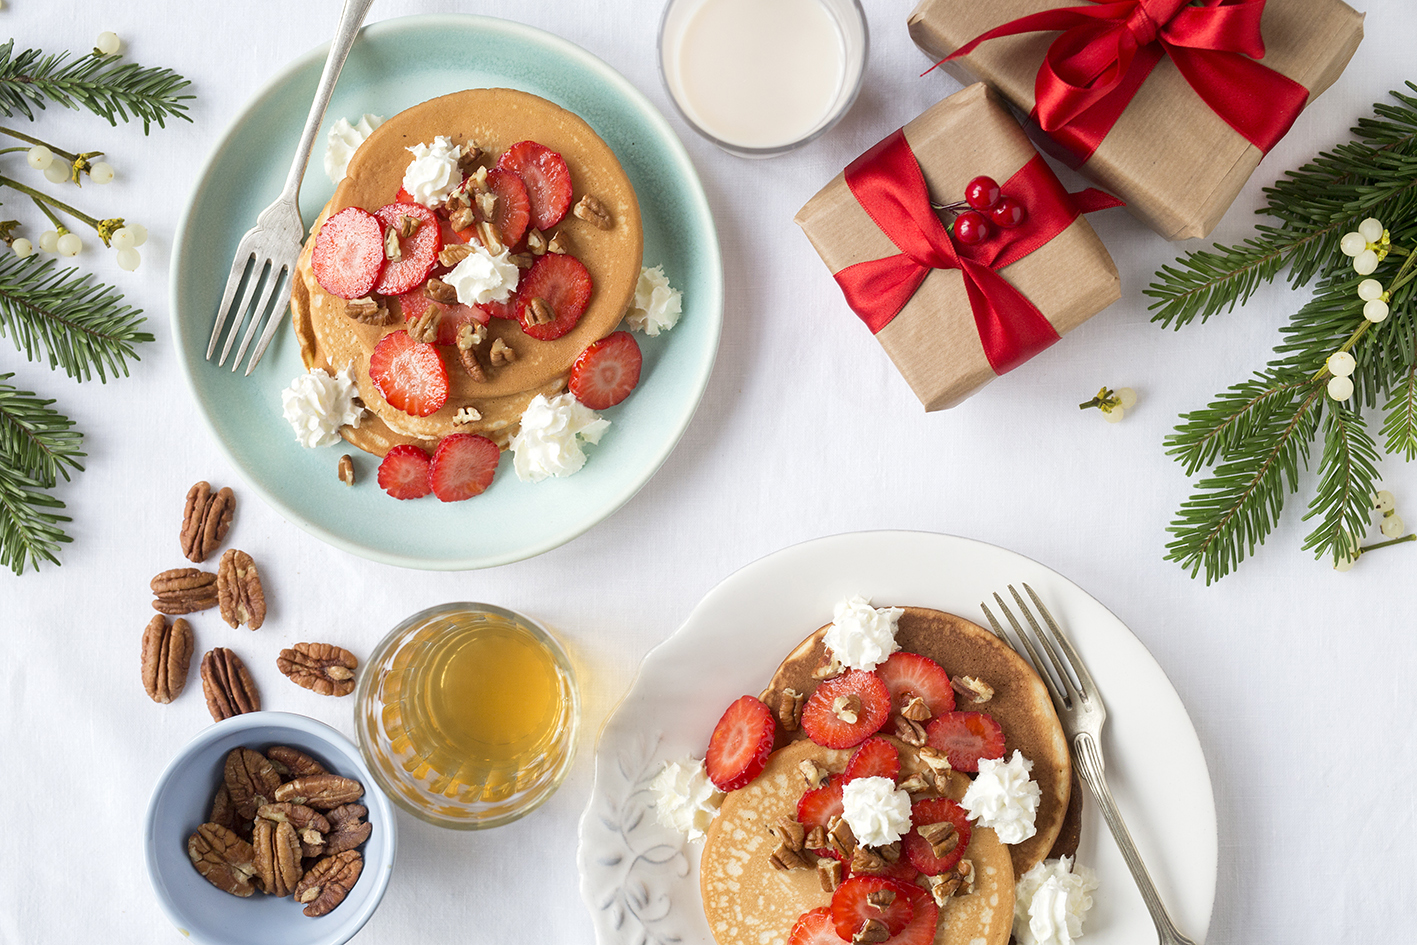 Two plates with pancakes decorated with strawberries, whipped cream and nuts